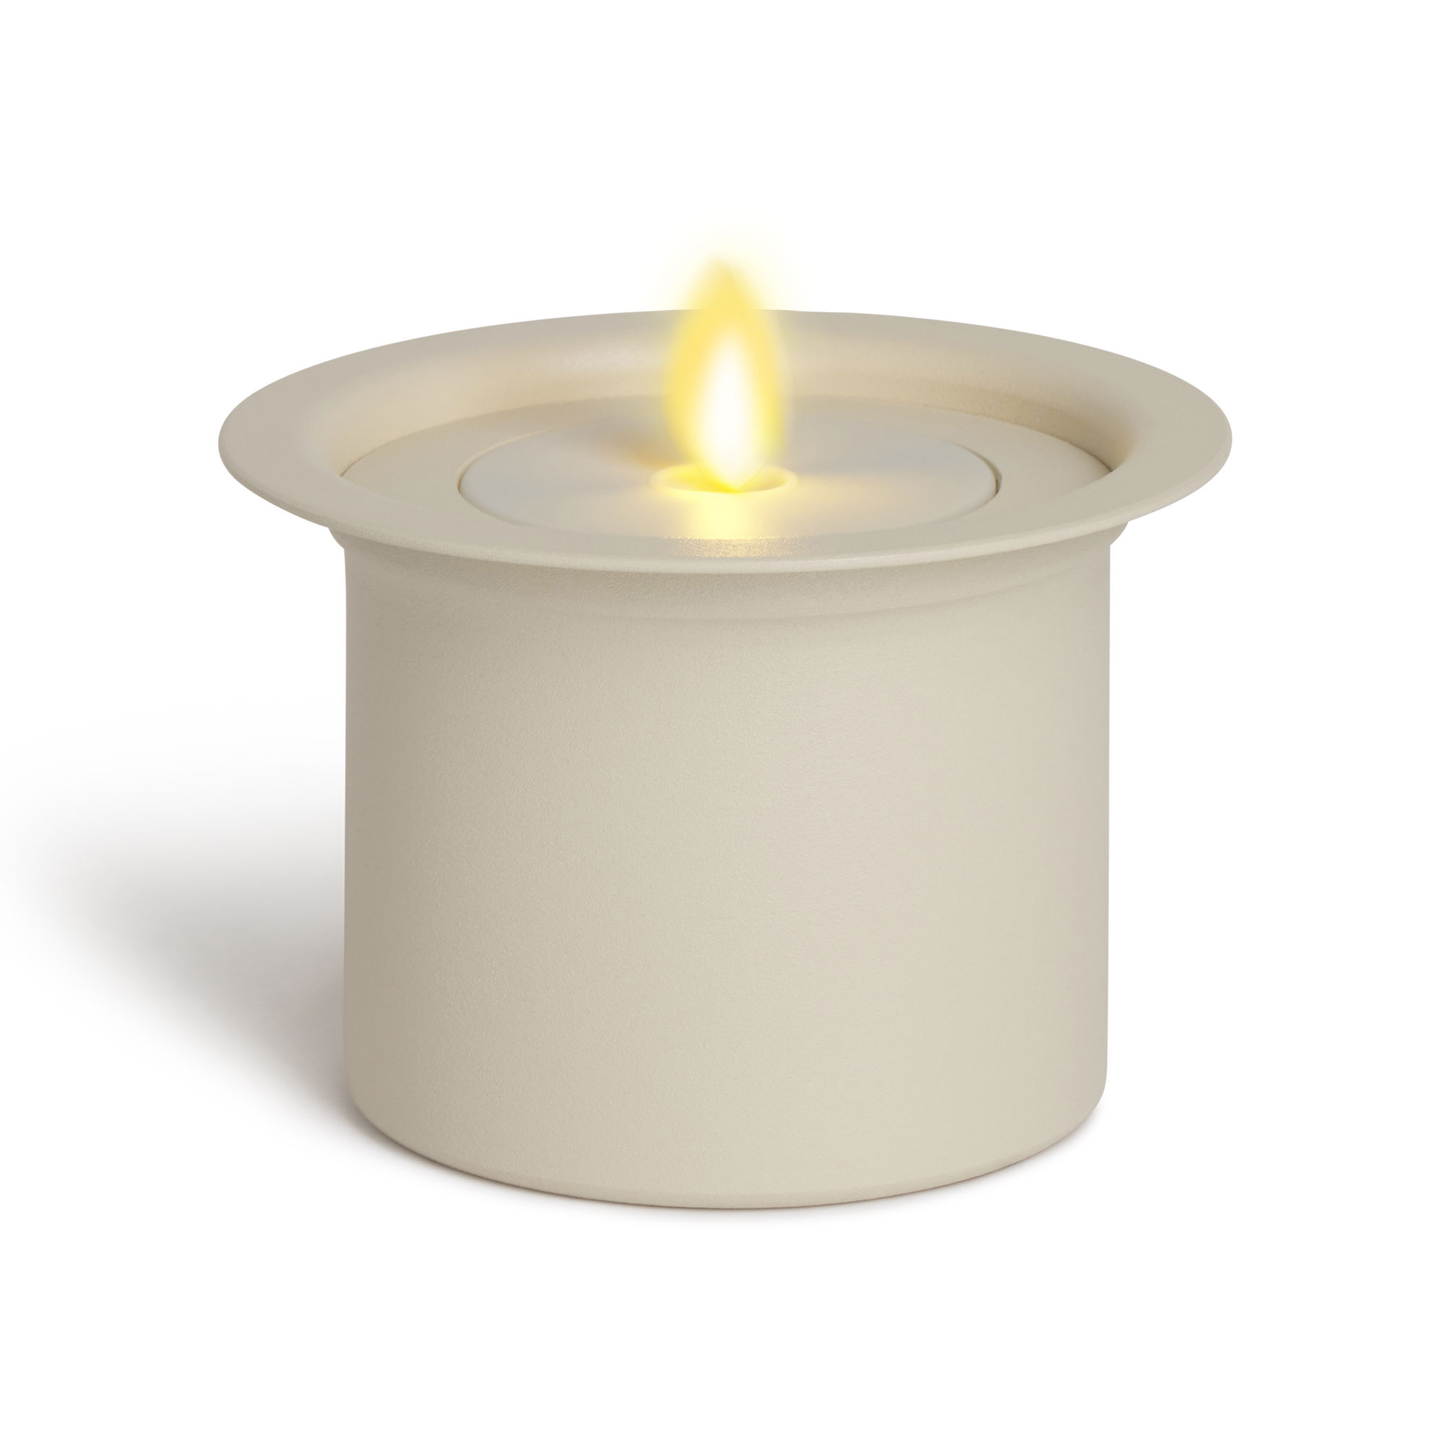 Oval Concrete Decorative Candle Holder with Outdoor Votive